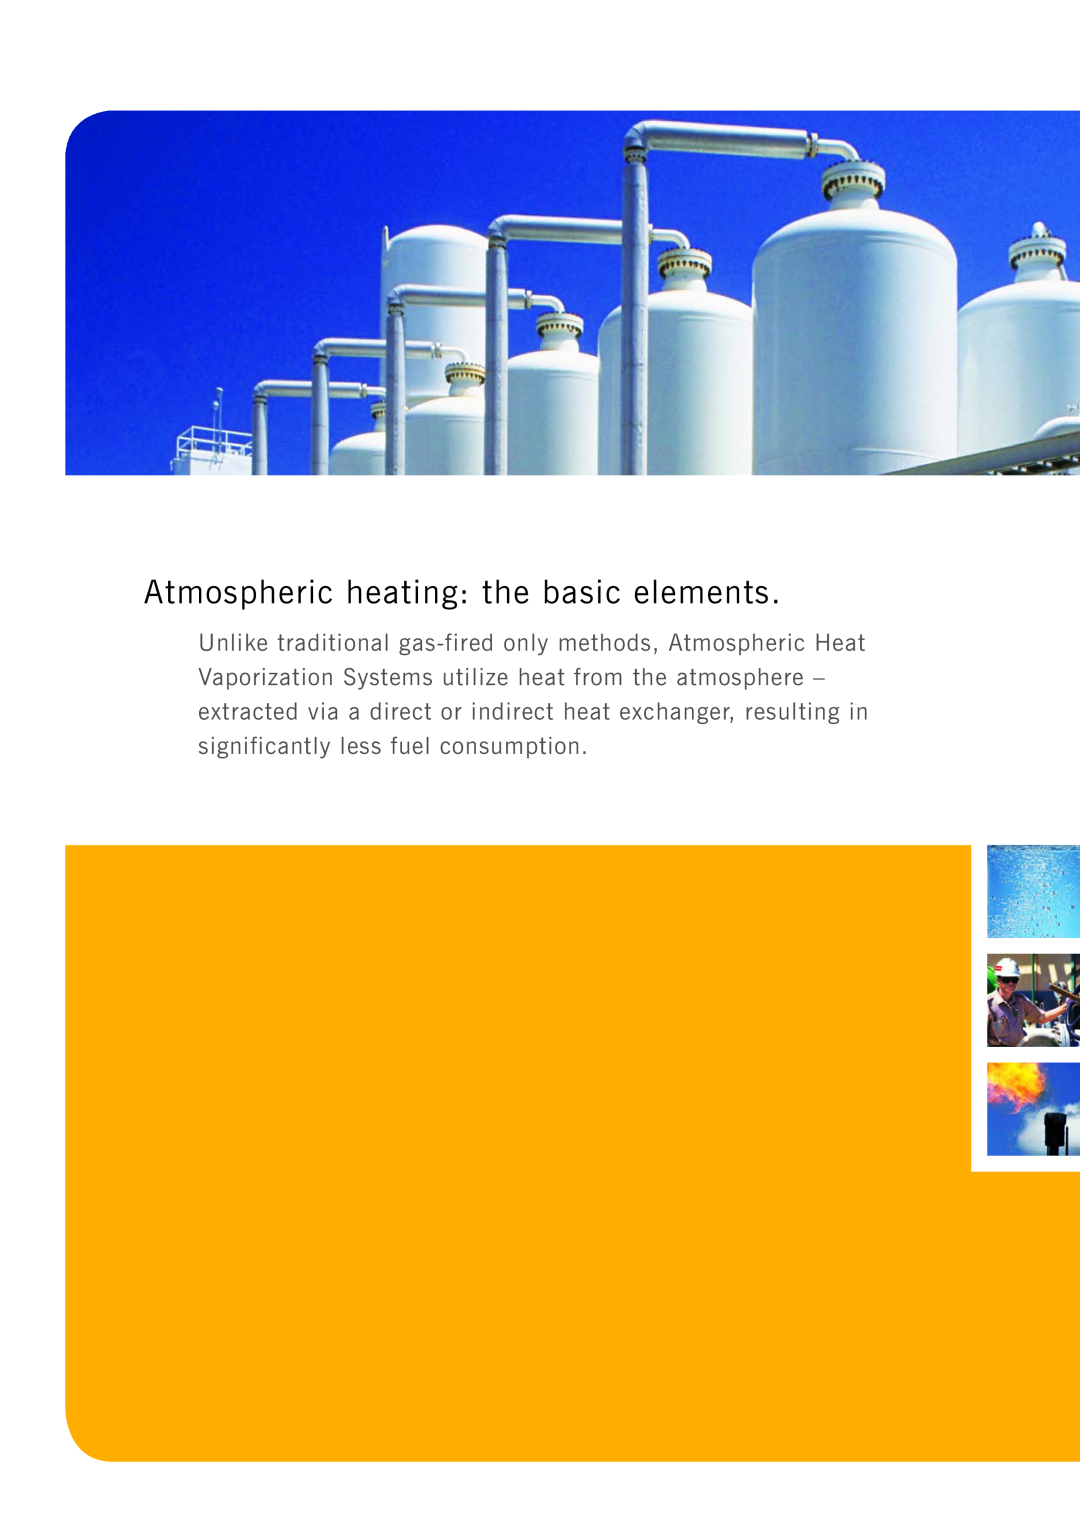 SPX Cooling Technologies Atmospheric Heat Vaporization Systems manual Atmospheric heating the basic elements 